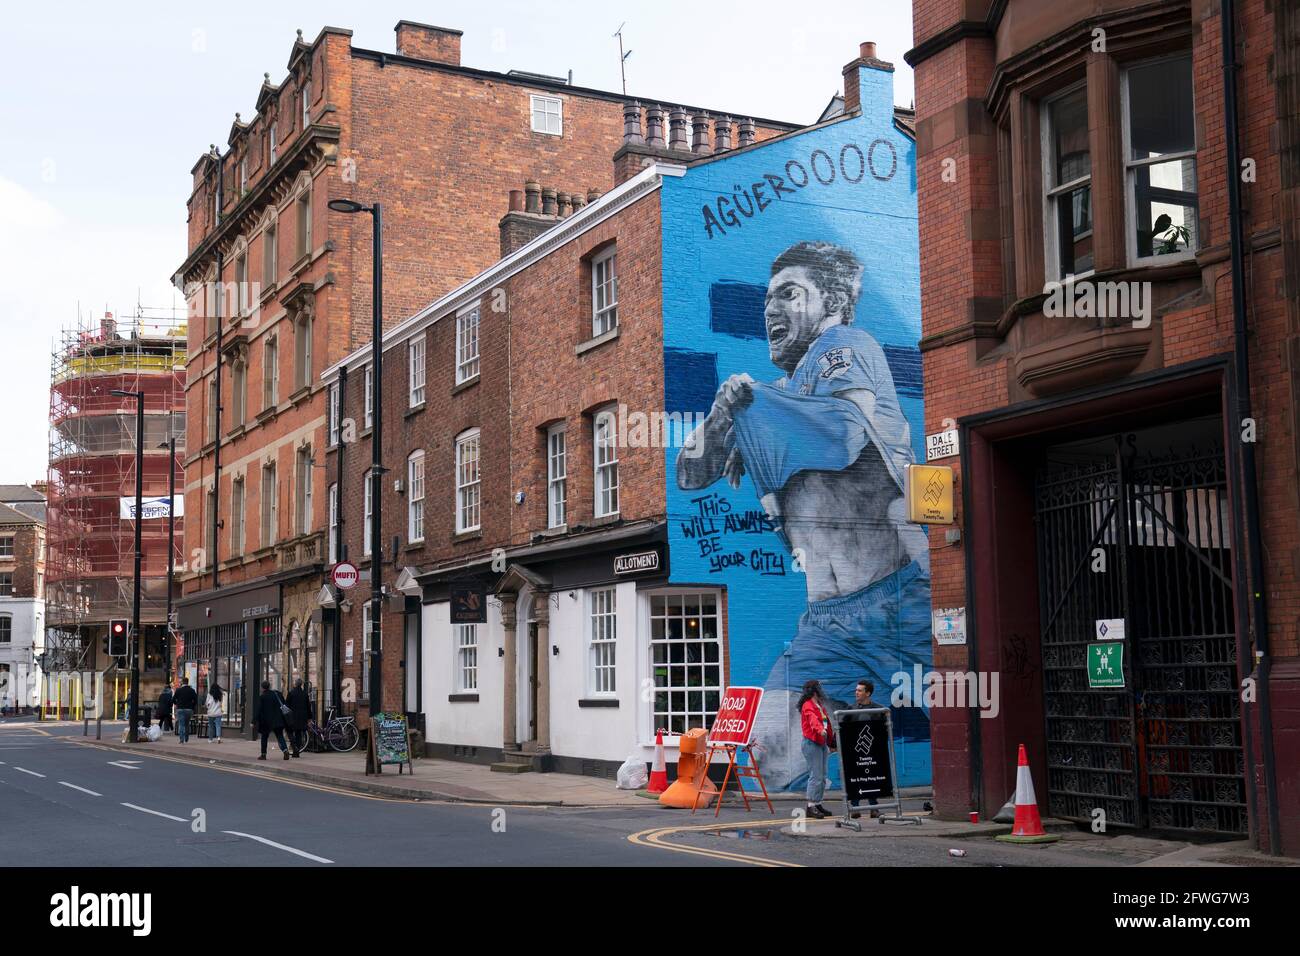 Manchester, UK, 22rd May 2021. A new mural of Manchester City footballer Sergio Aguero is seen in Manchester’s Northern Quarter the day before the team are presented with the English Premier League trophy, Manchester, UK. Aguero has agreed to sign for Barcelona on a two-year contract when his Manchester City deal expires next month. Credit: Jon Super/Alamy Live News. Stock Photo